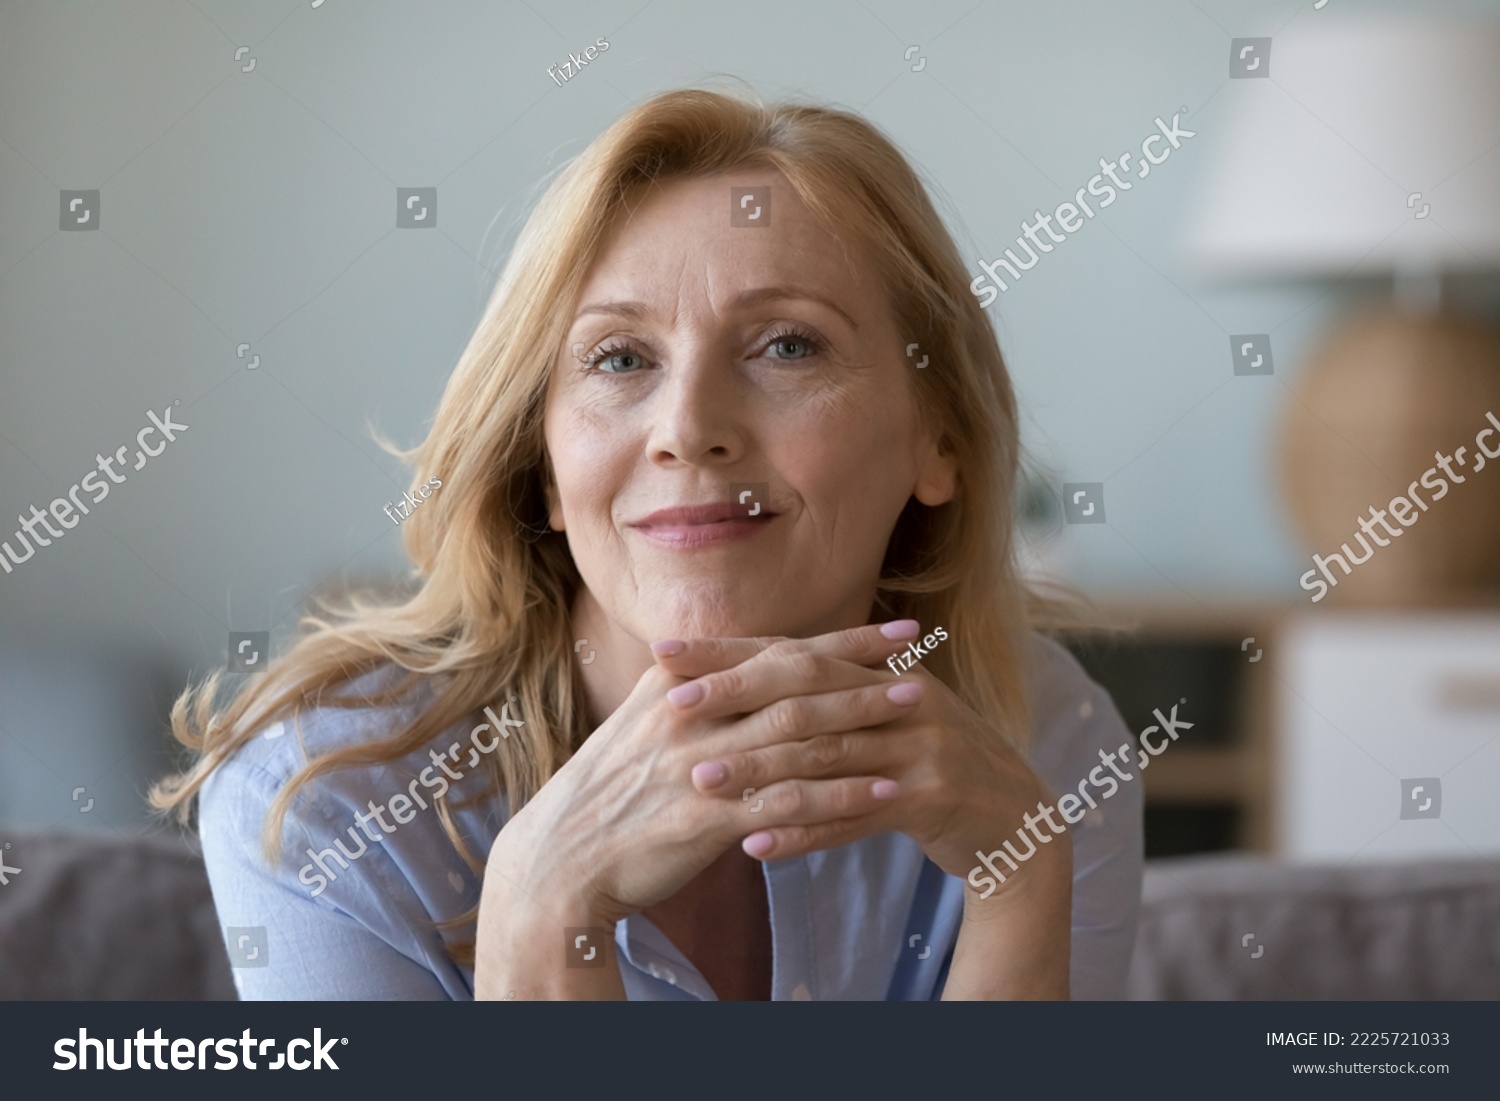 Head shot close up portrait attractive middle-aged woman resting on cozy sofa alone at home staring at camera, posing for photo looks peaceful and confident. Midlife, medical insurance cover for older #2225721033